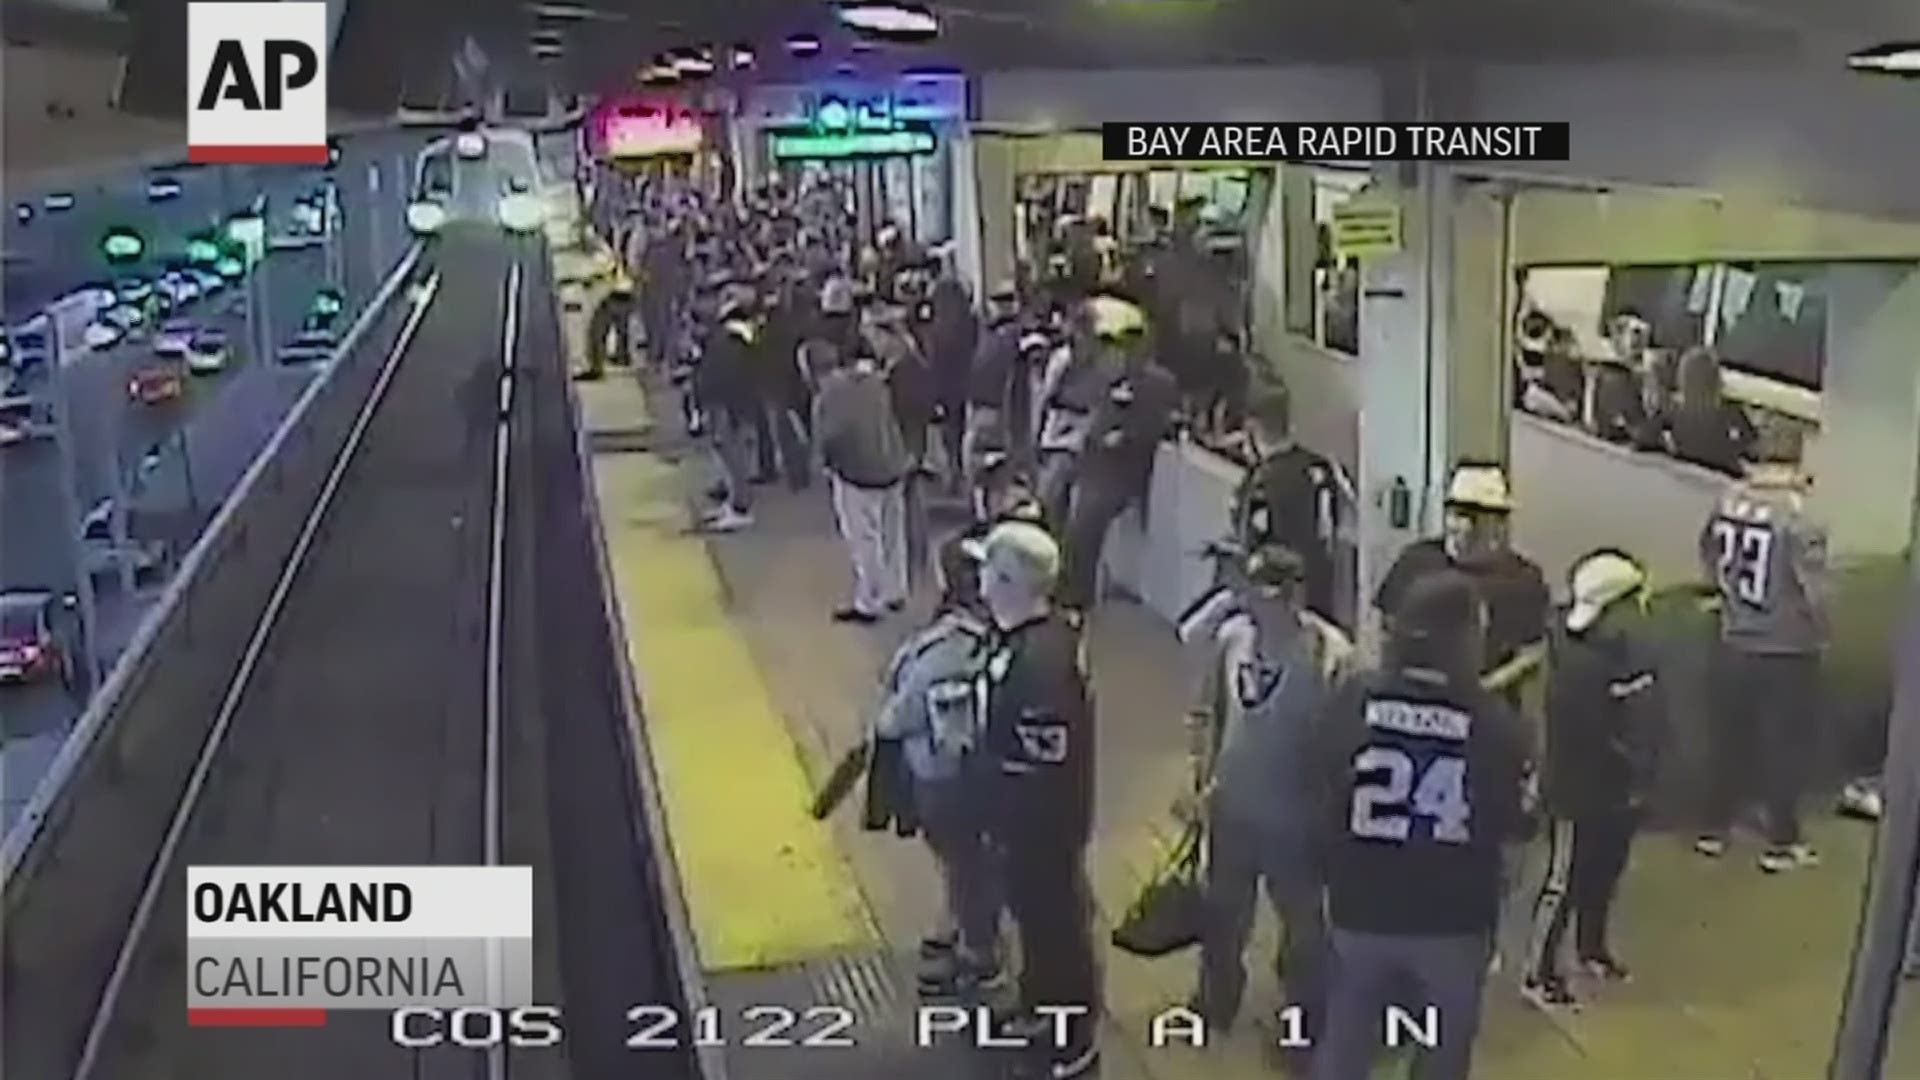 A transit supervisor is being hailed as a hero after pulling a man off train tracks when he fell from a crowded platform following an Oakland Raiders football game.